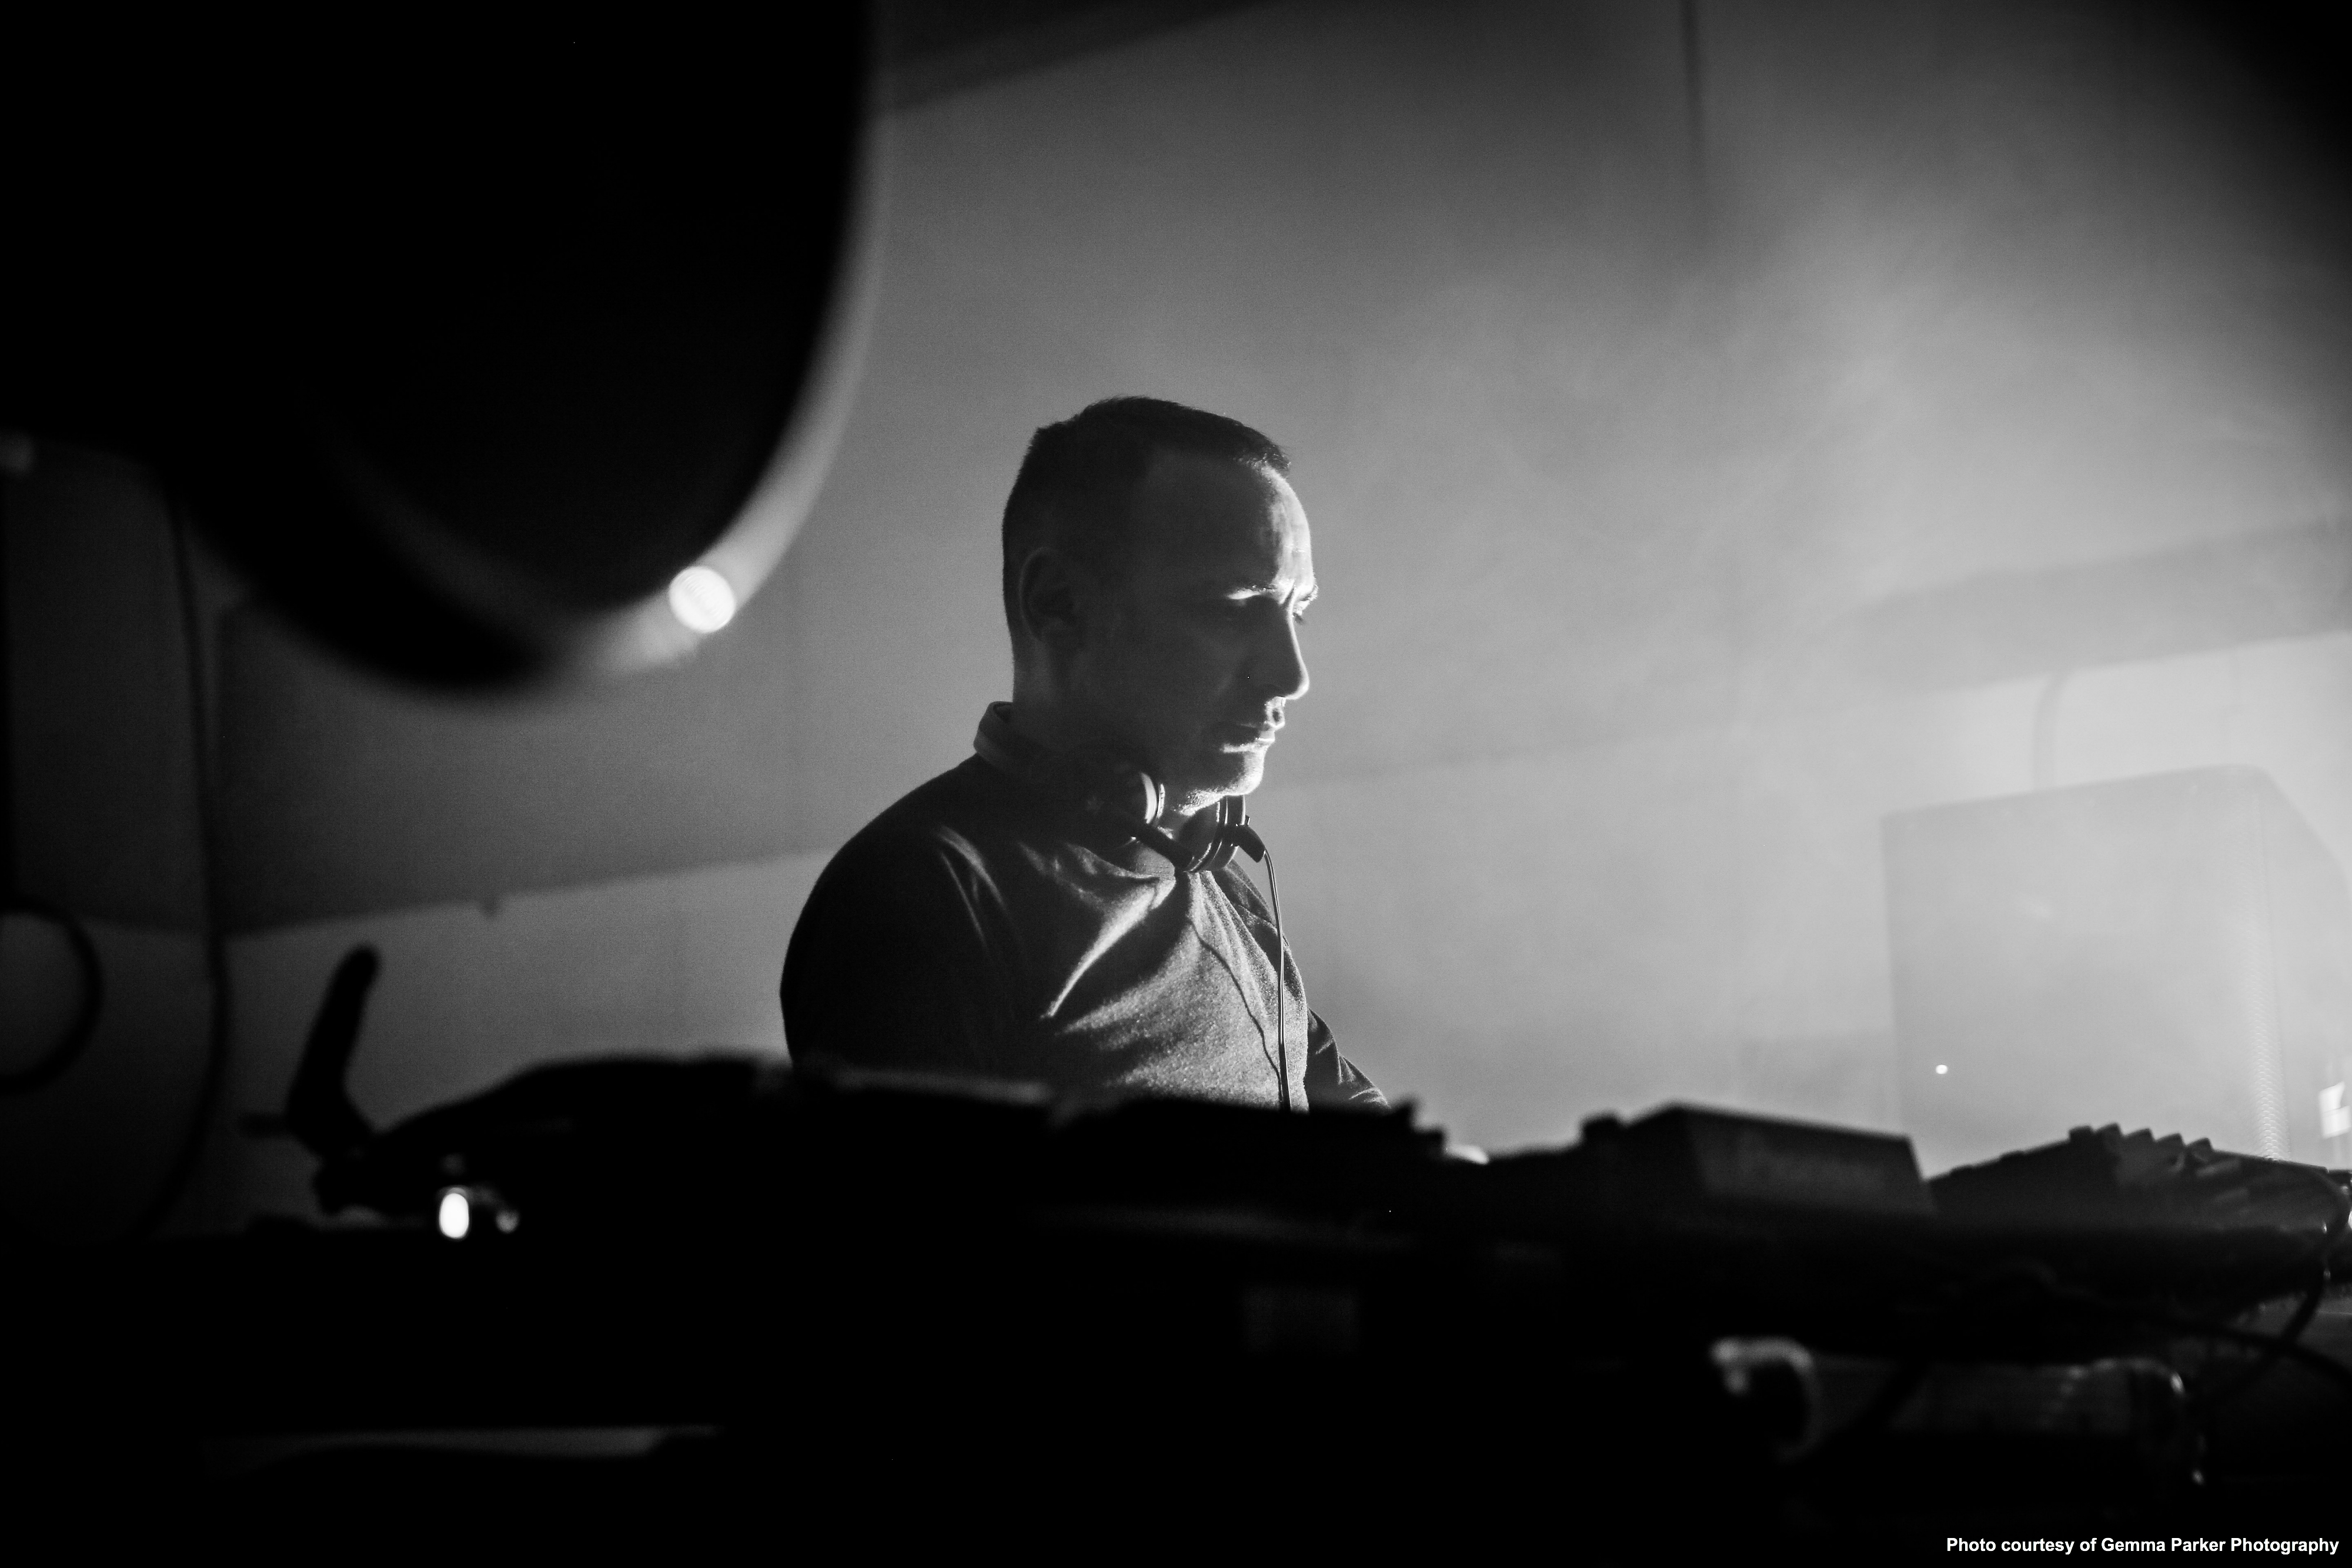 A black and white photo of a man behind a DJ deck with fog in the background.